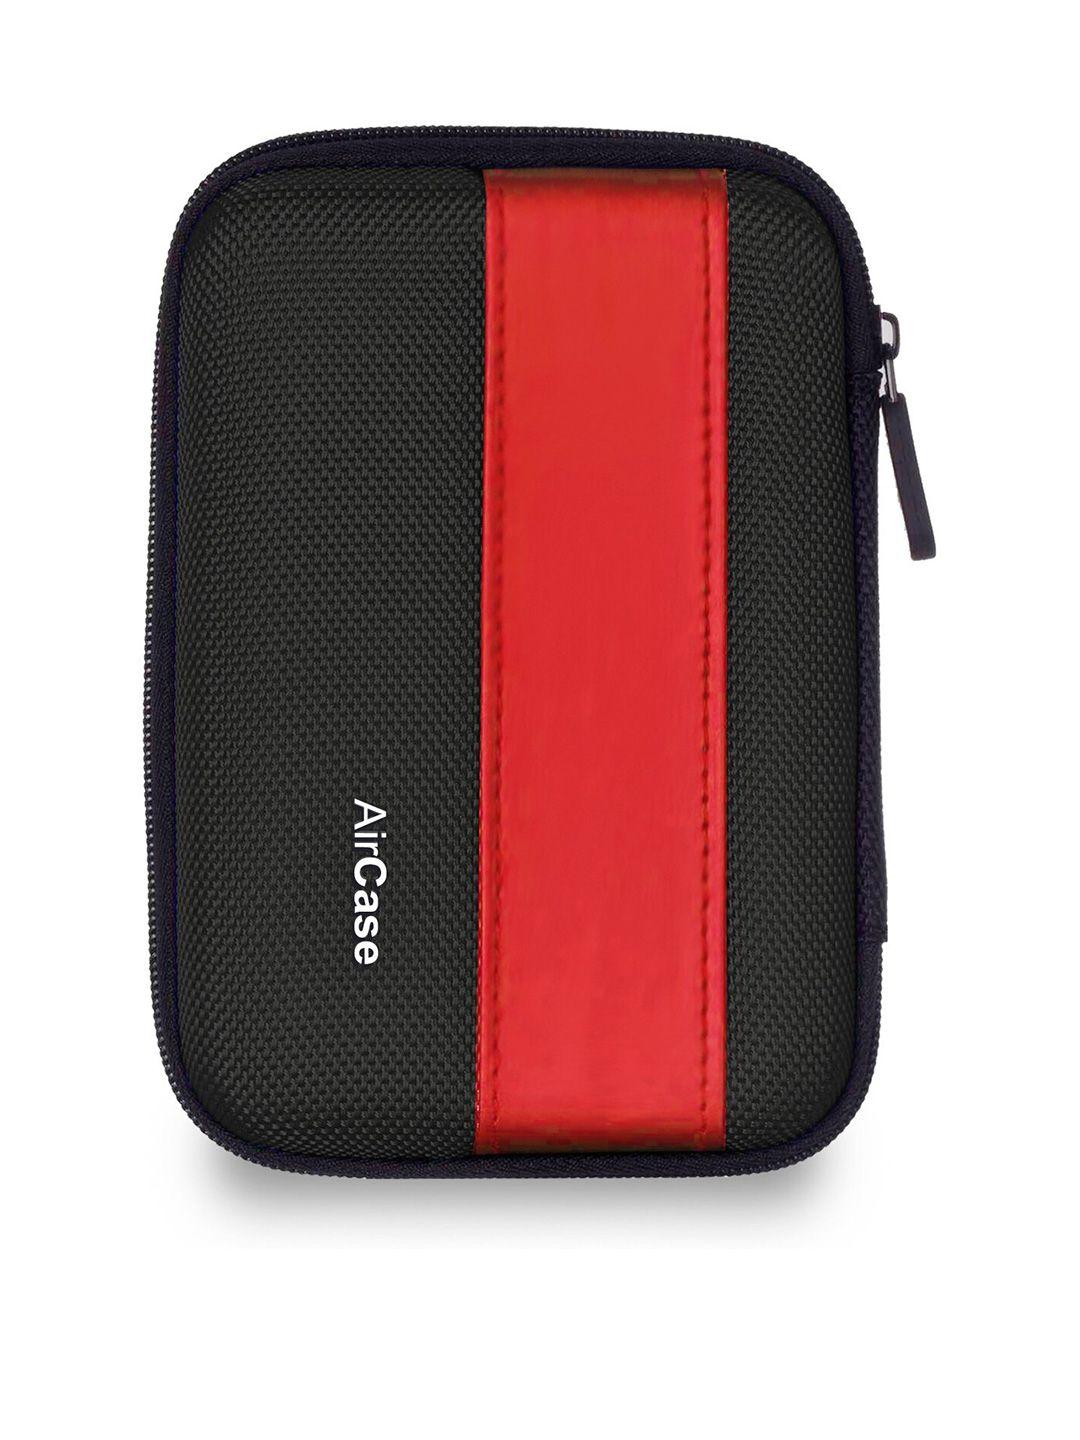 aircase nylon 2.5 inch water resistance hard drive case/cover